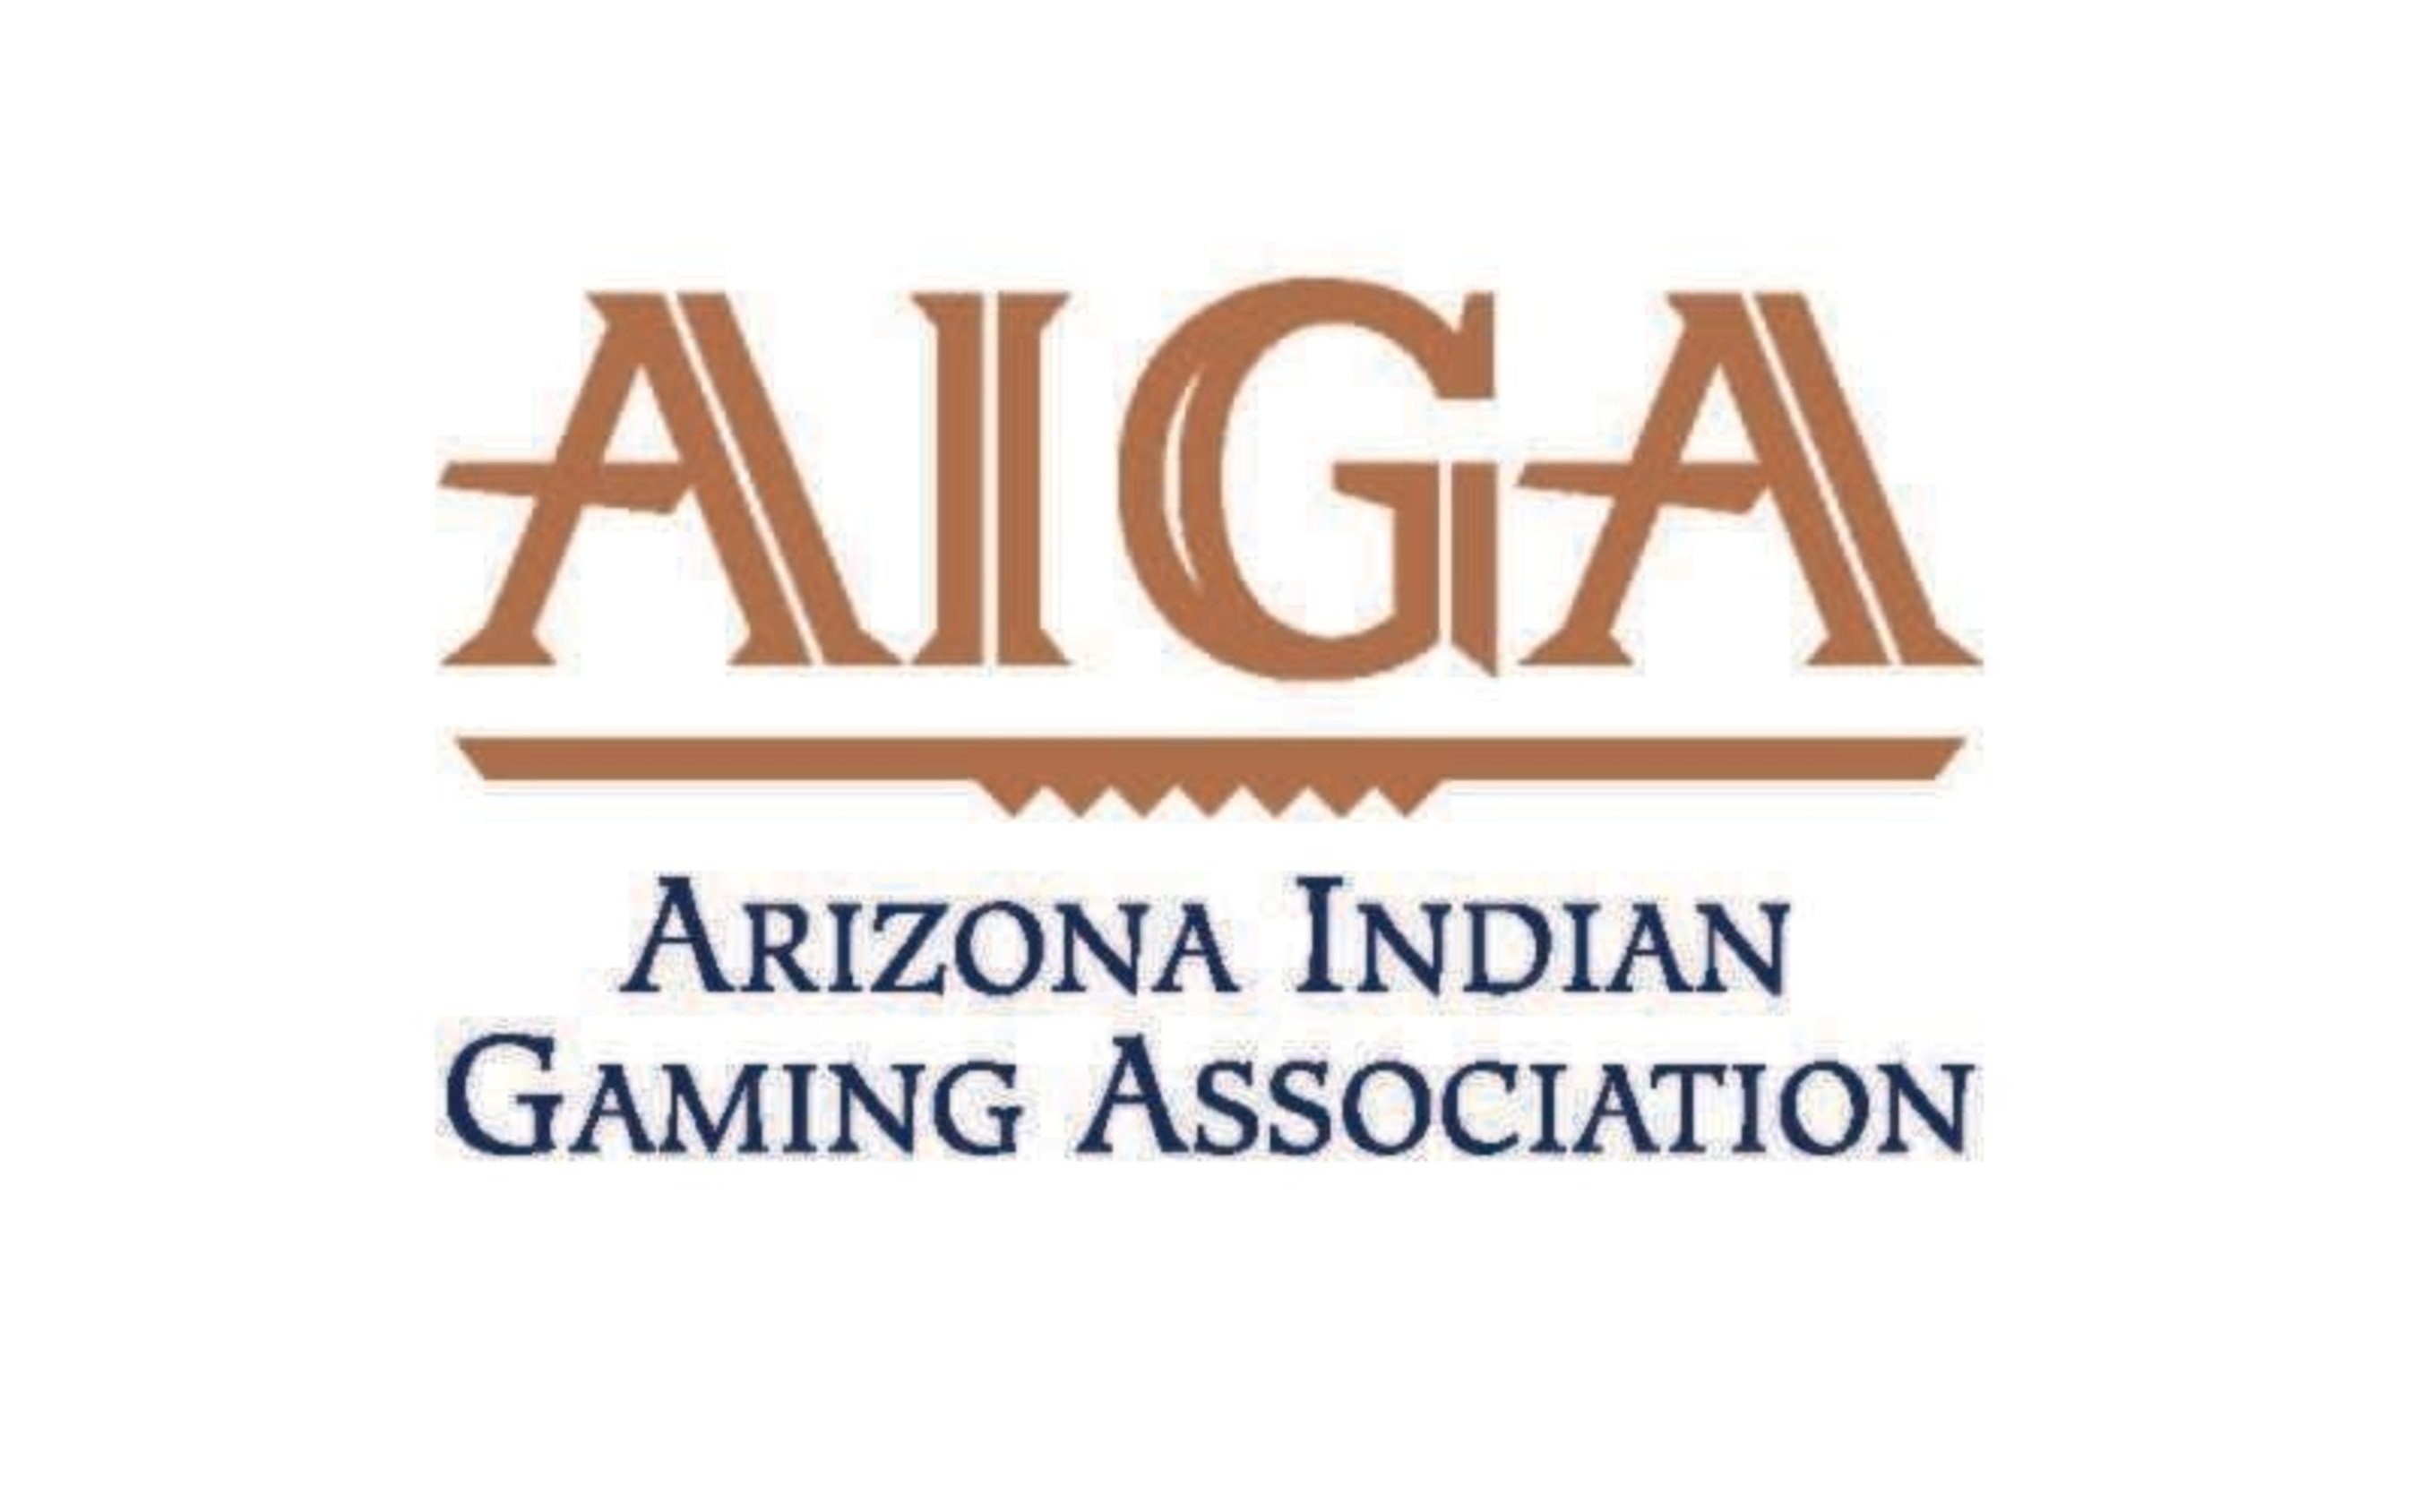 The Arizona Indian Gaming Association (AIGA) today unveiled a groundbreaking economic impact study that provides a comprehensive look at the widespread impacts of Tribal Gaming in Arizona.